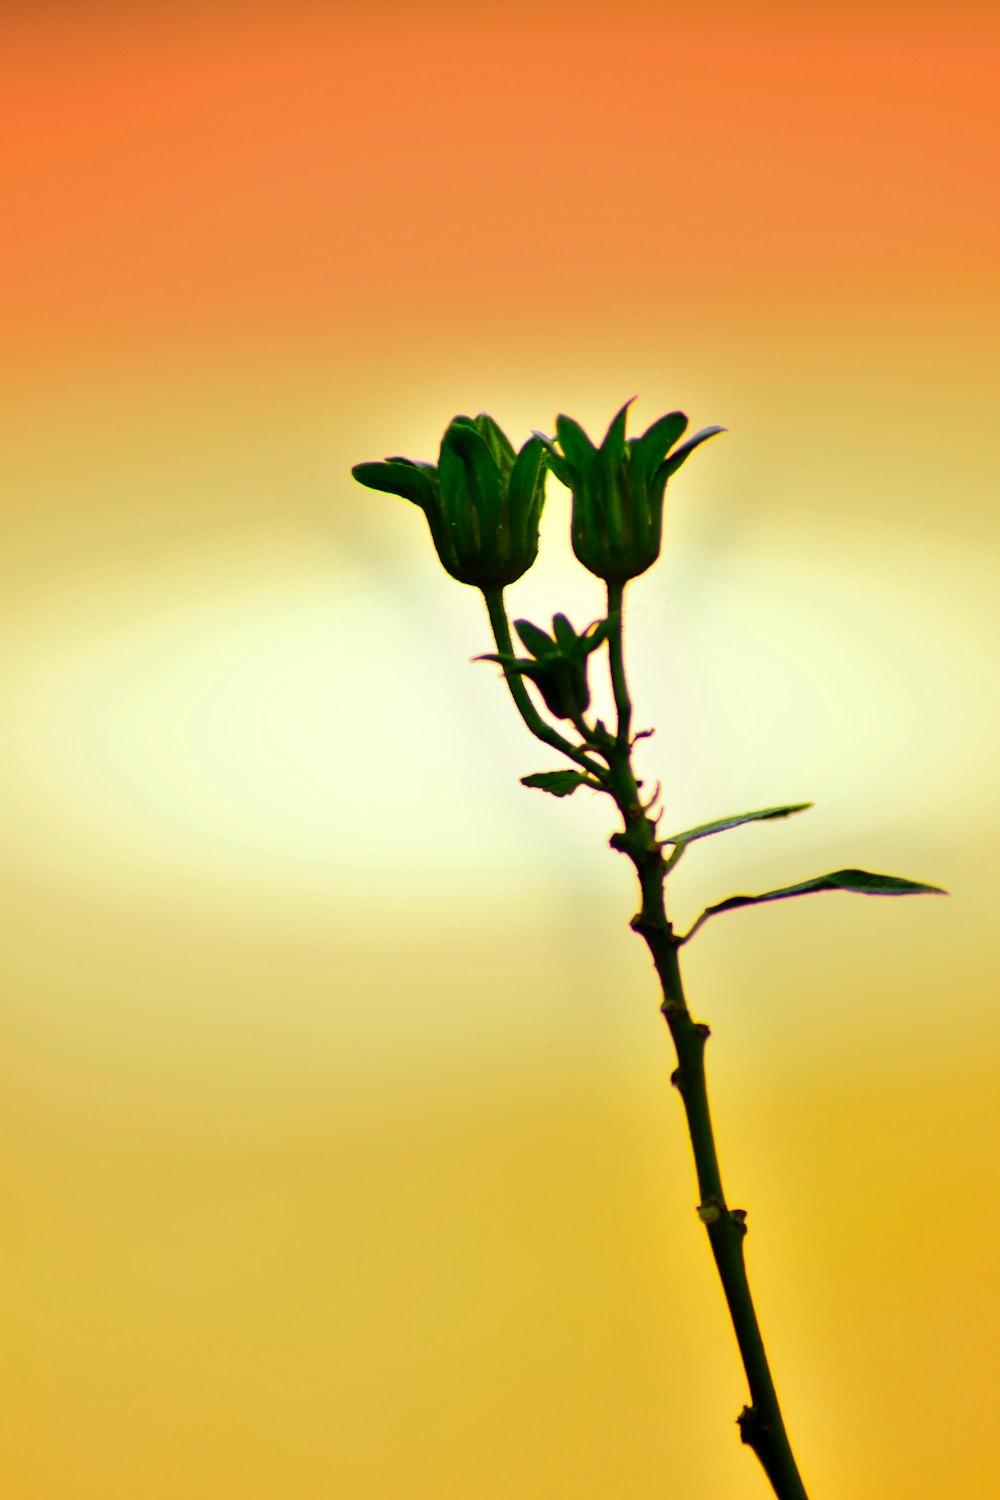 green plant with yellow background